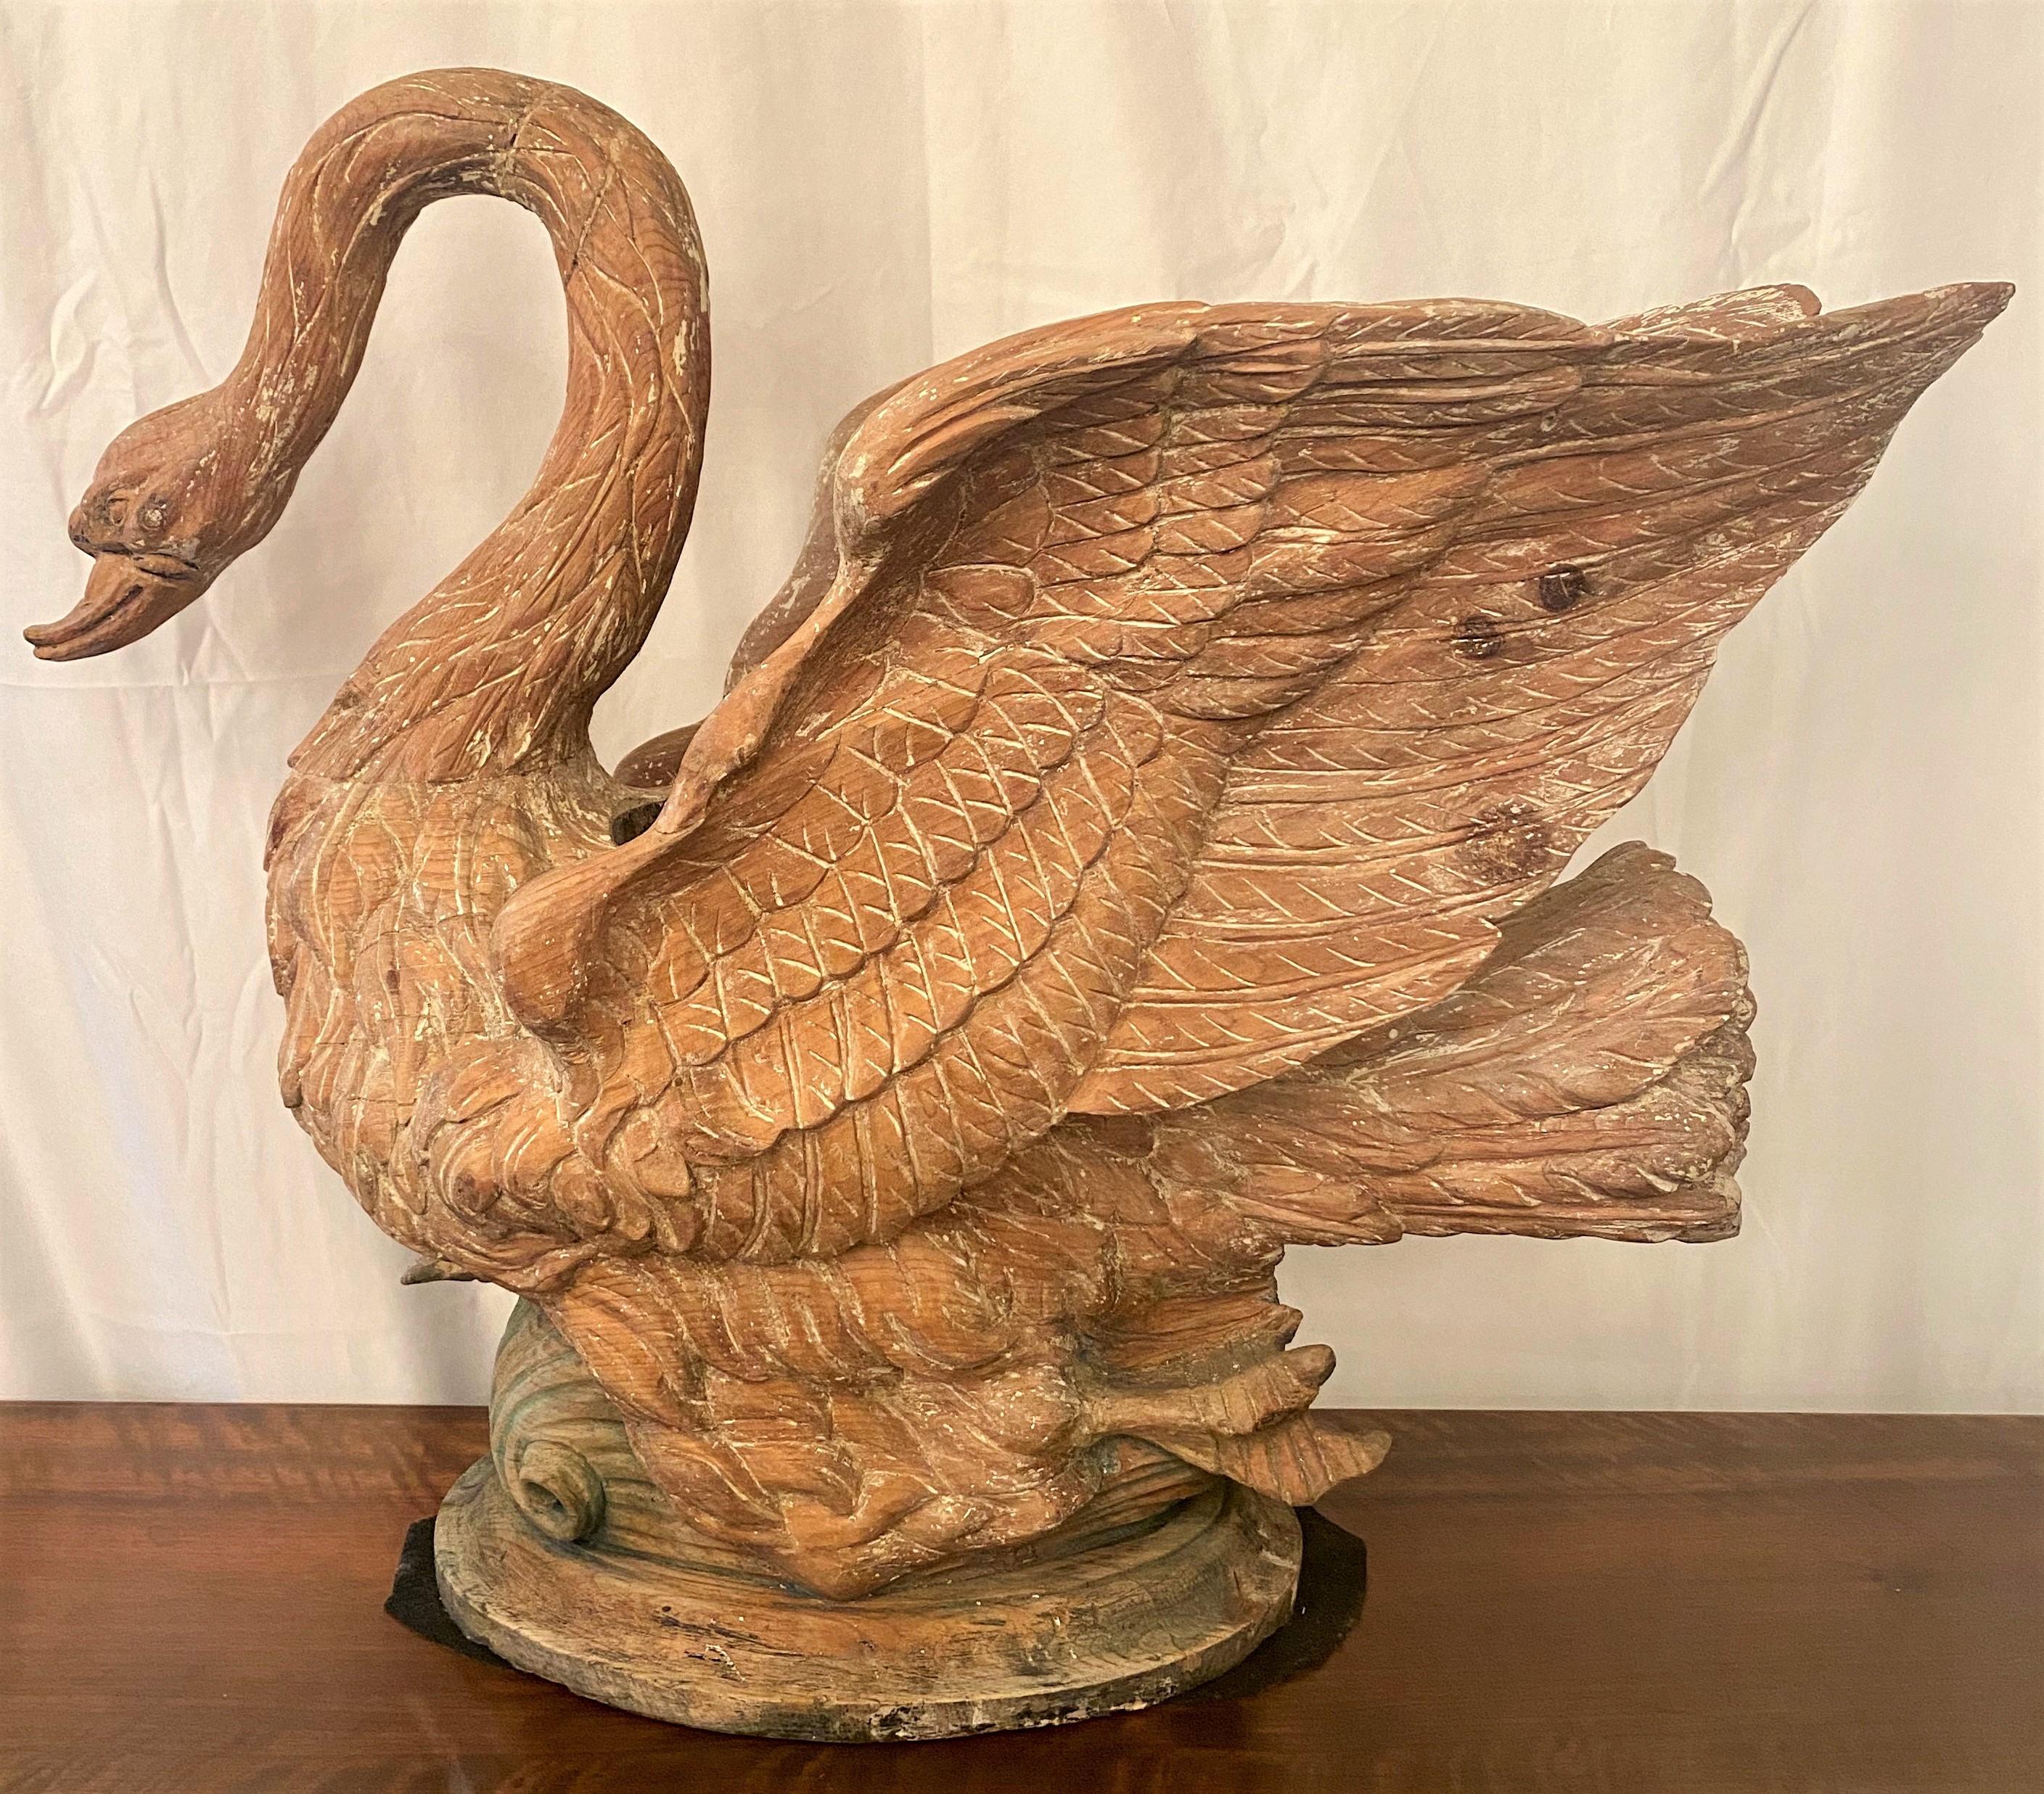 Large estate carved wood swan jardinière, circa 1920-1930.
Exceptional size and carving.